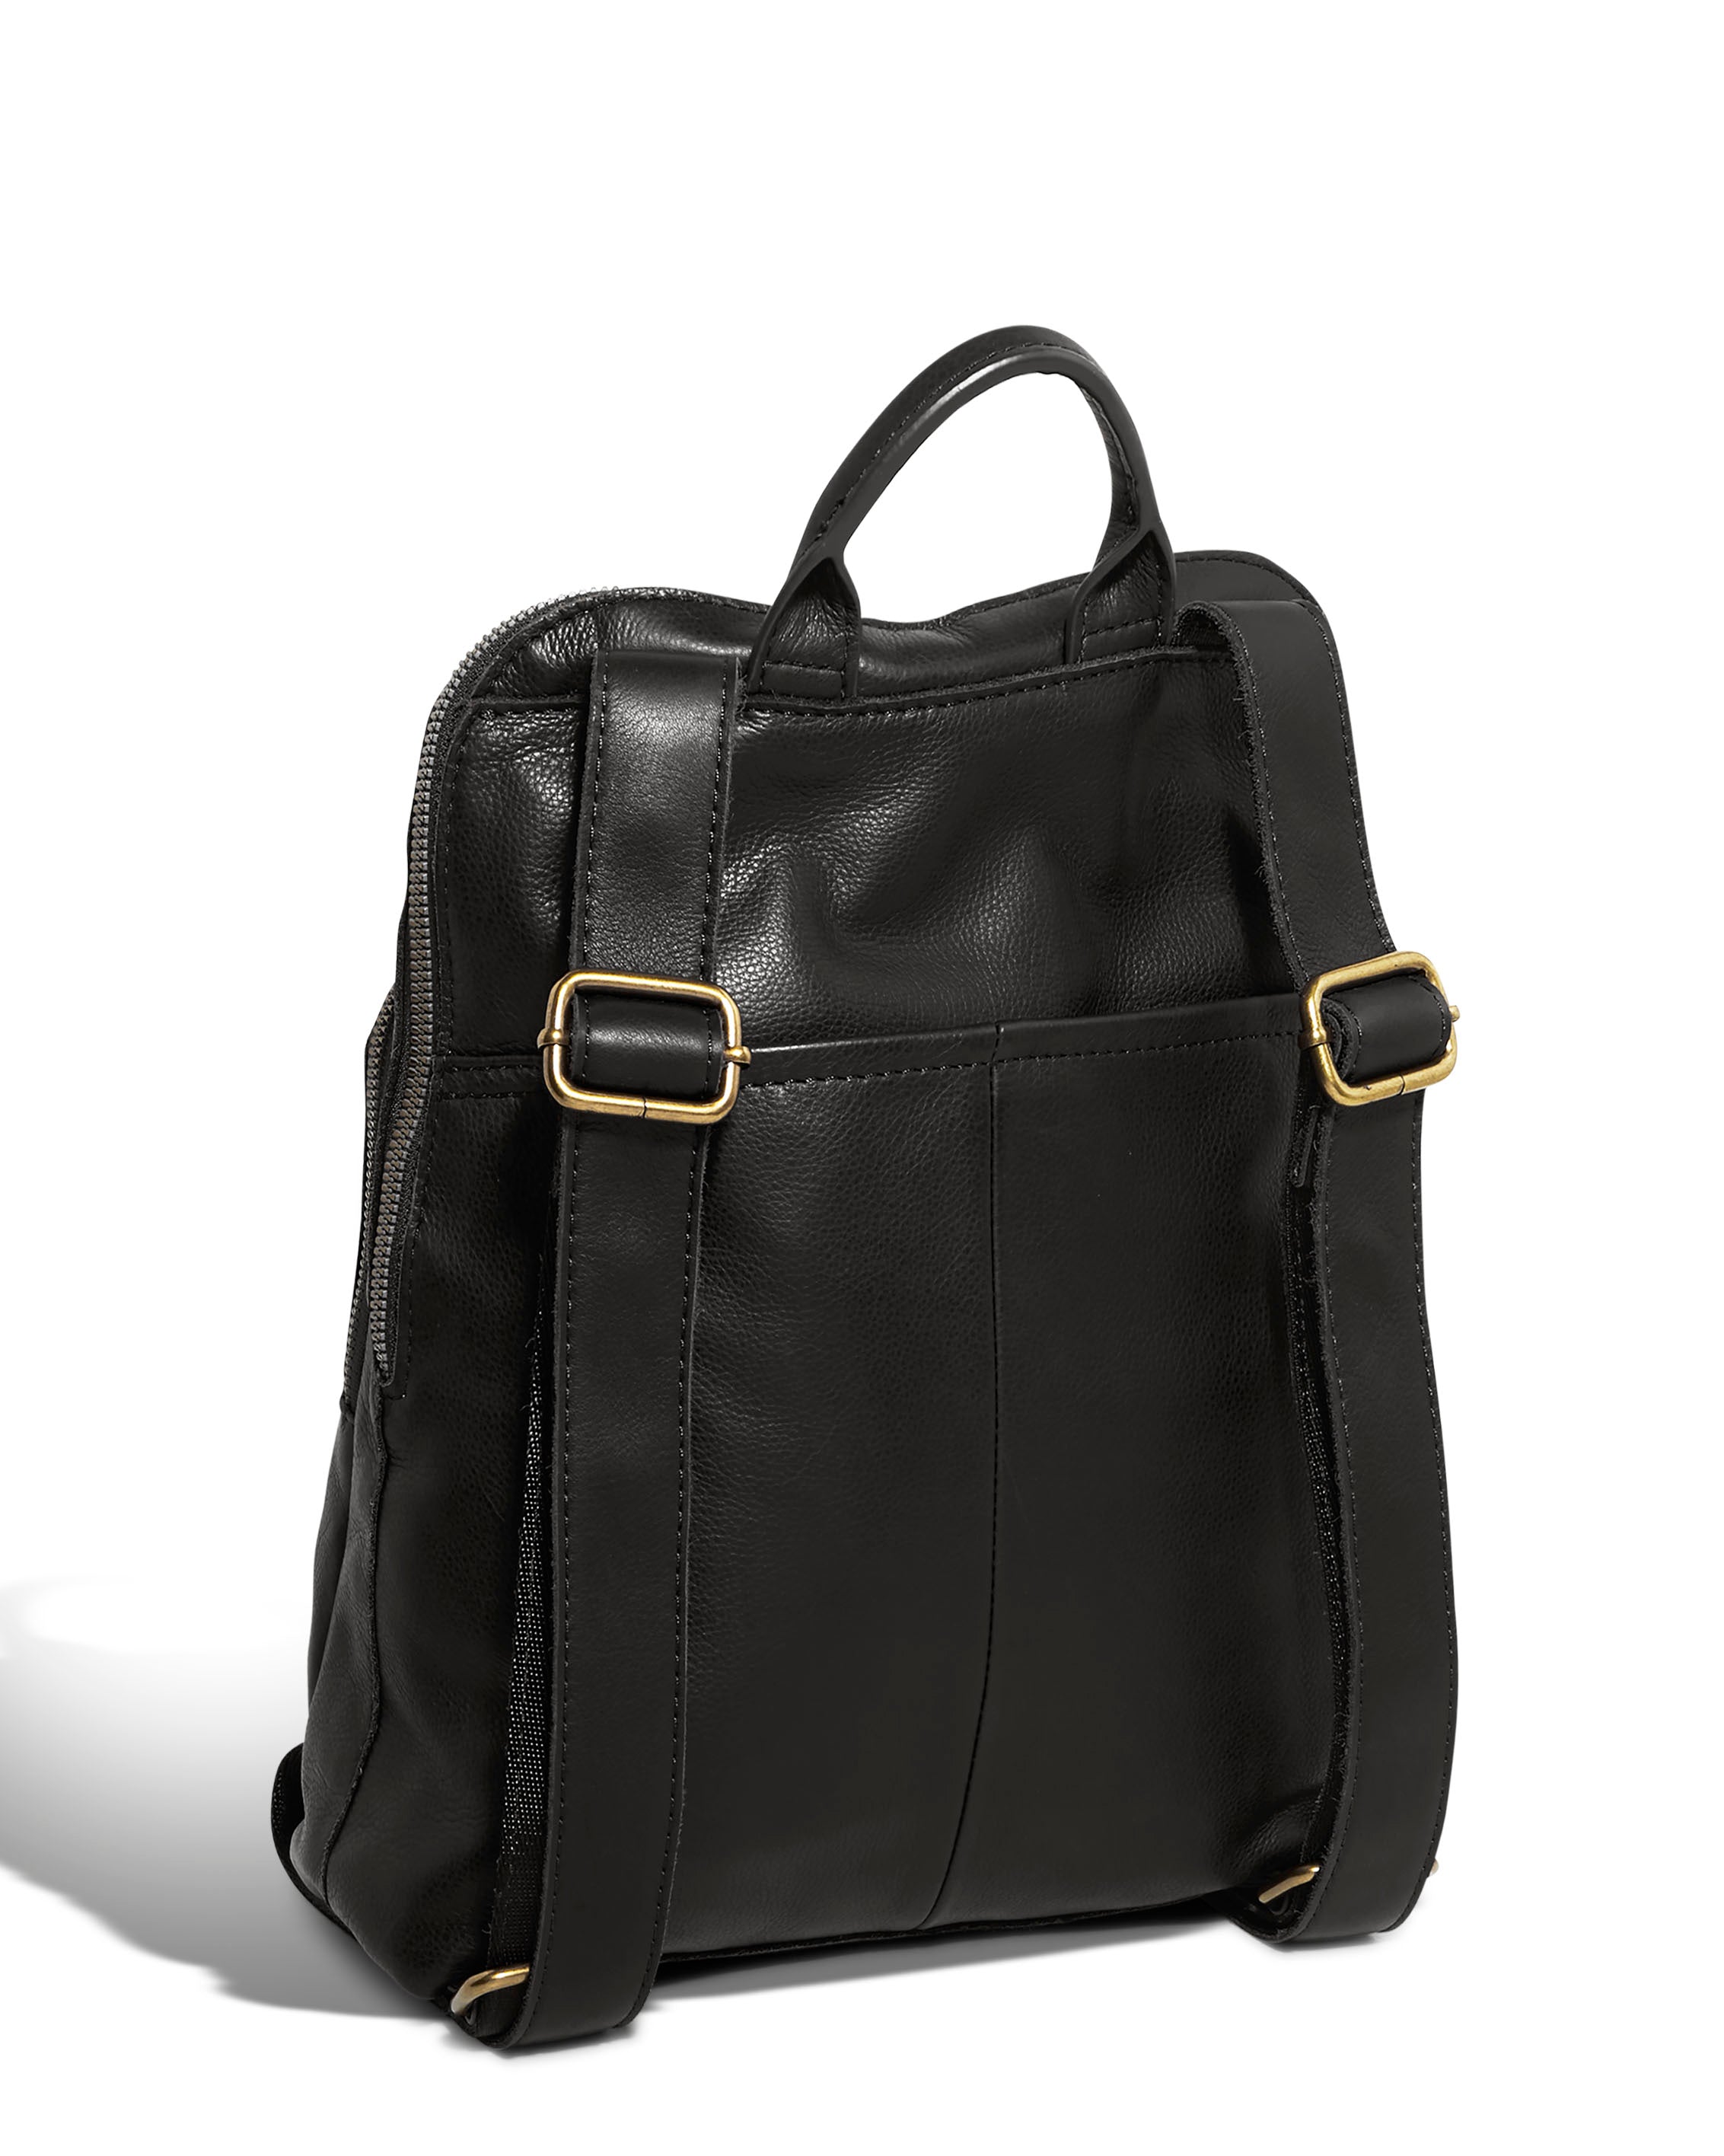 American Leather Co. Cleveland Leather Backpack ,Black